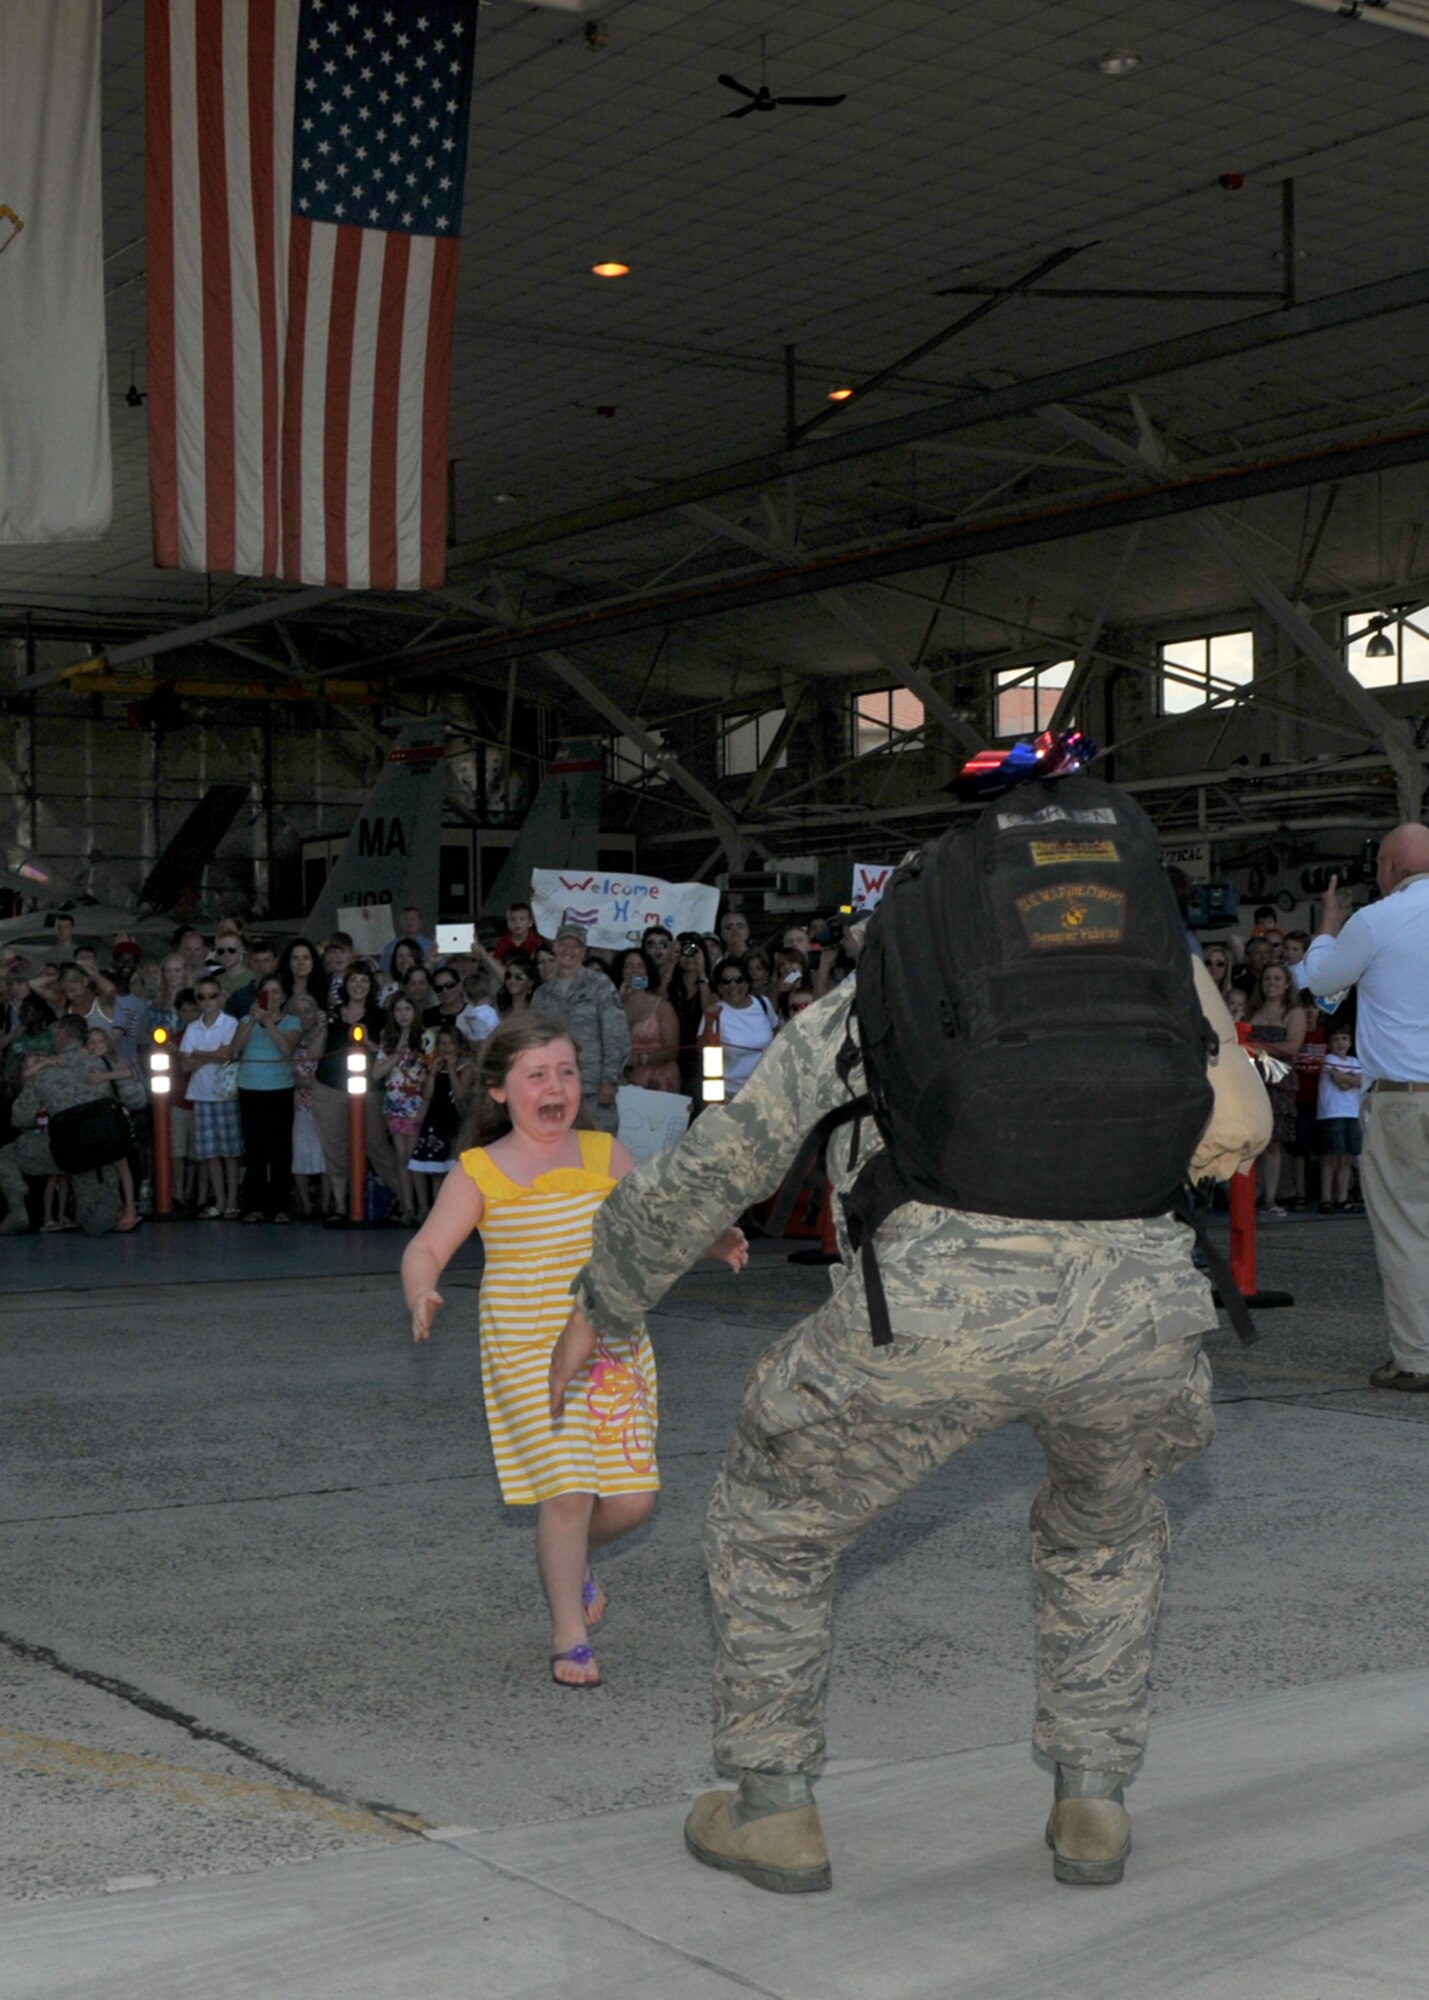 On July 10, 2012, about 200 104th Fighter Wing members returned home from a 90-day, Air Expeditionary Force deployment.

Family and friends welcomed the members home with cheers, tears and hugs.  
